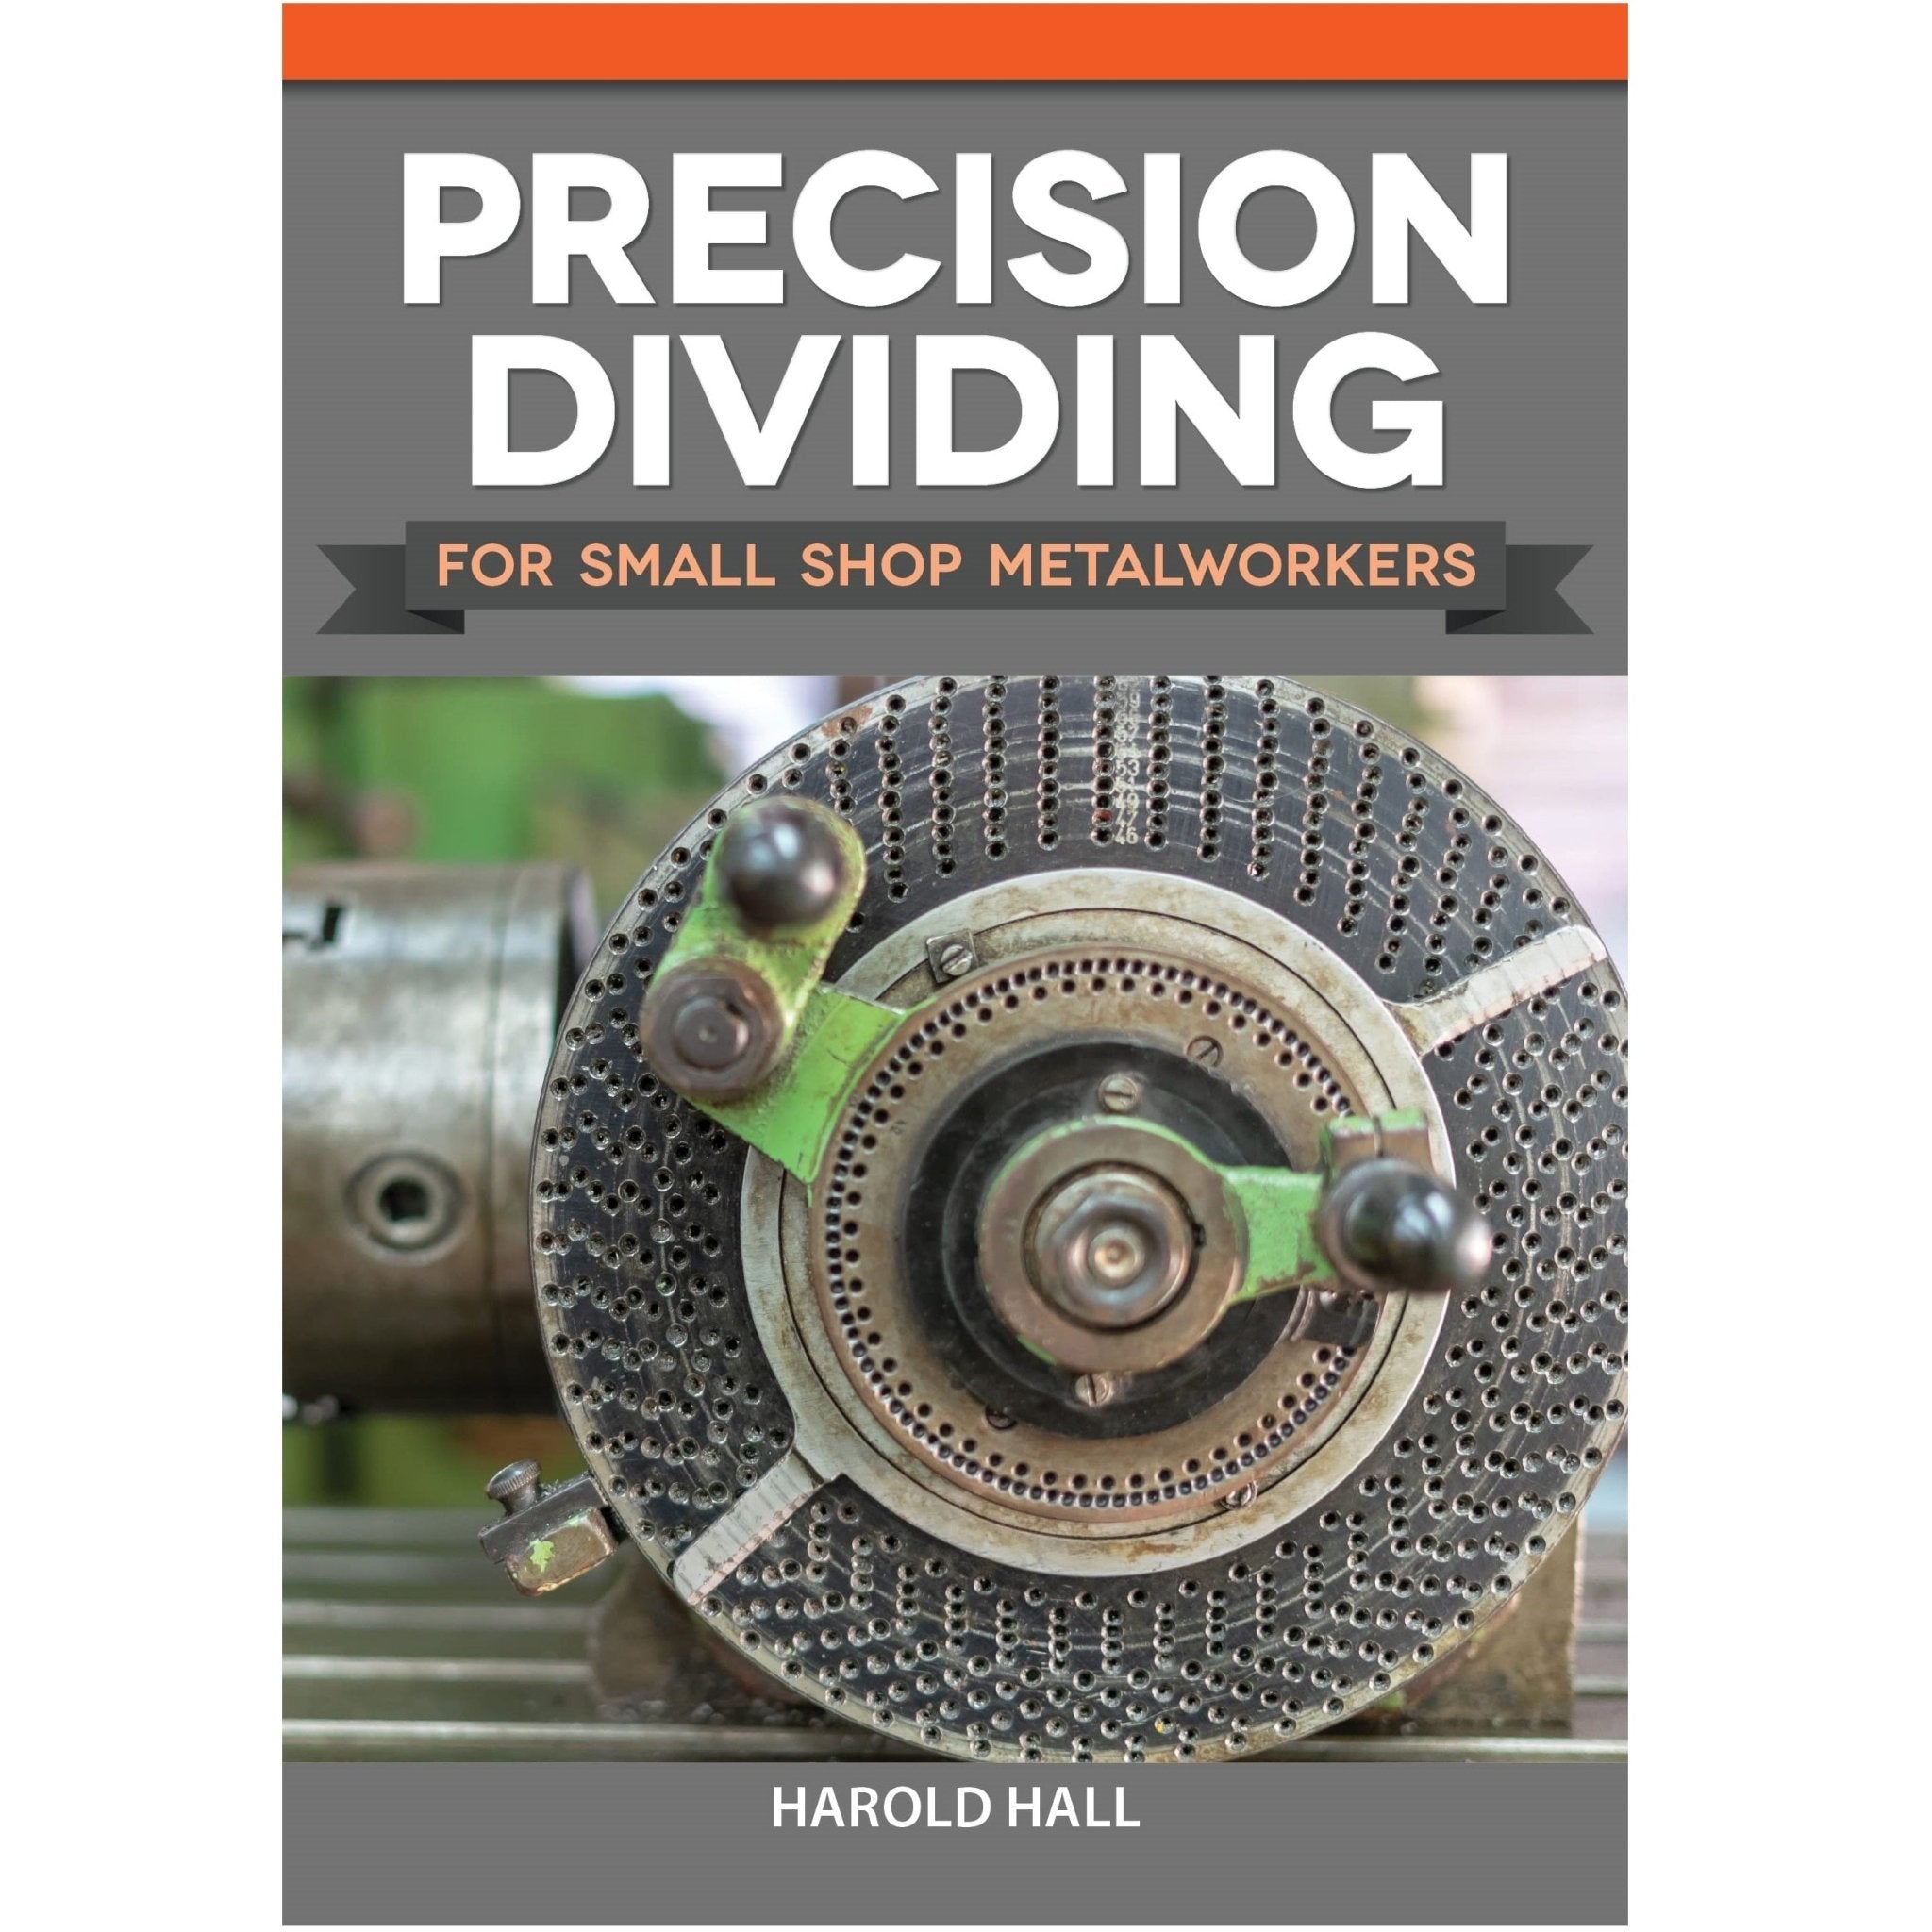 Precision Dividing for Small Shop Metalworkers Book